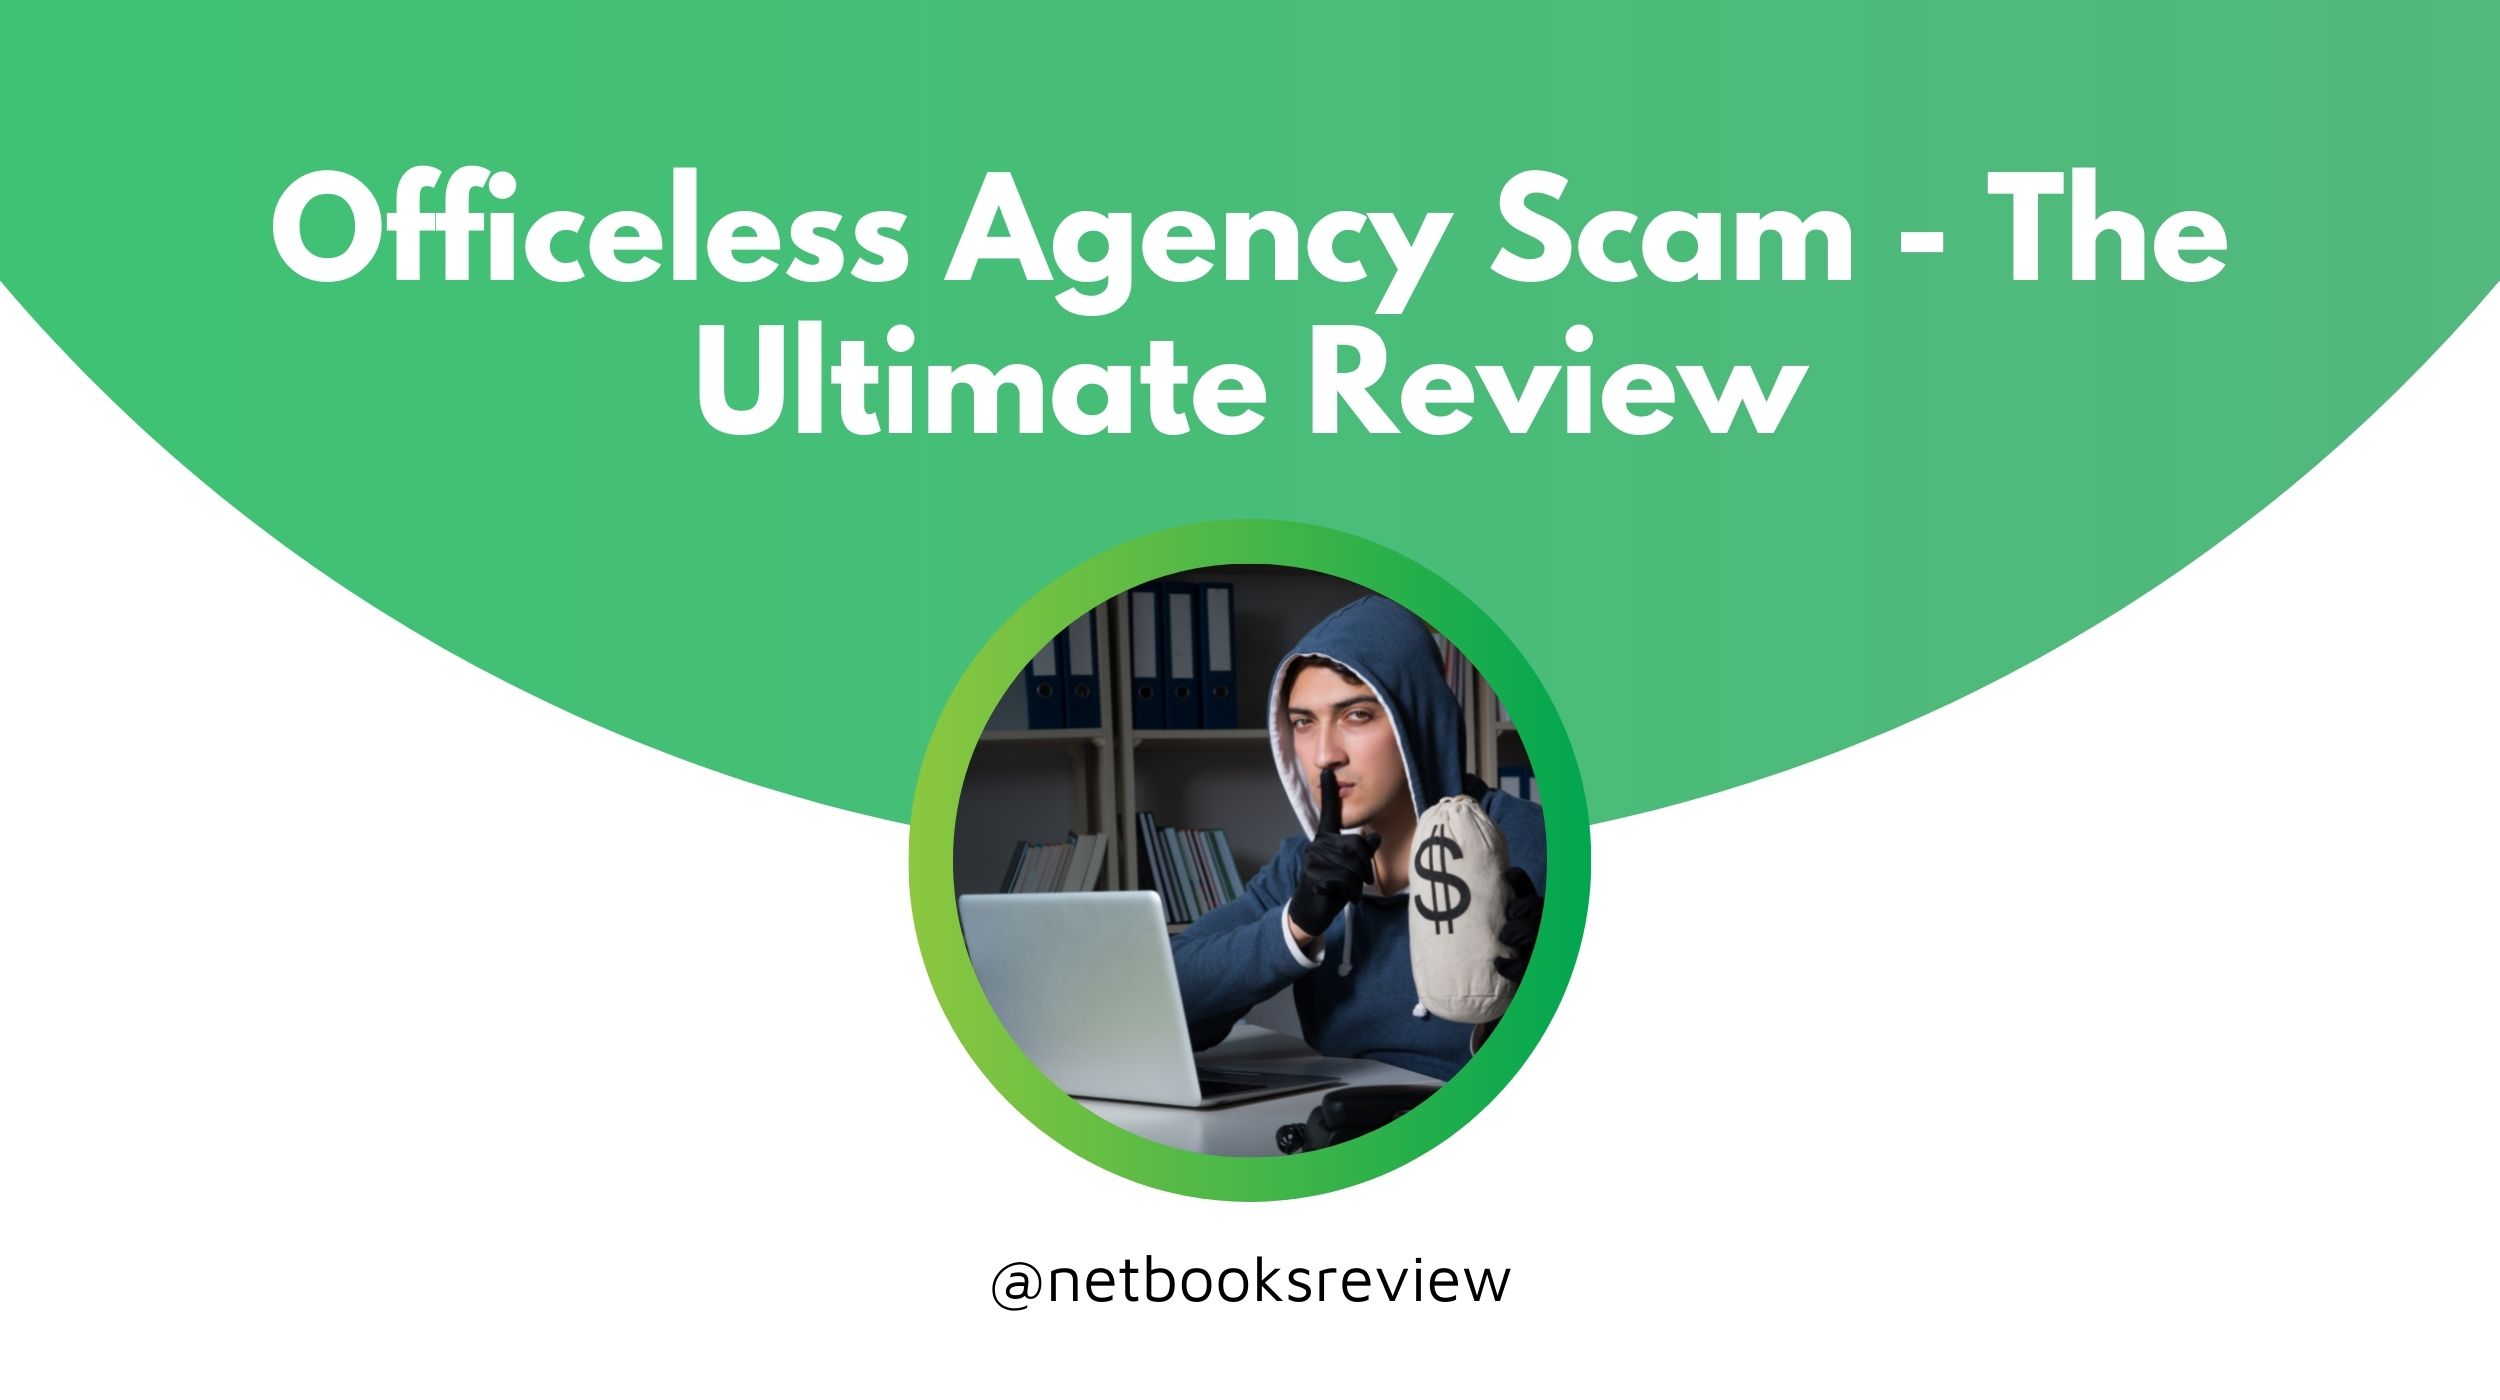 Officeless agency scam review